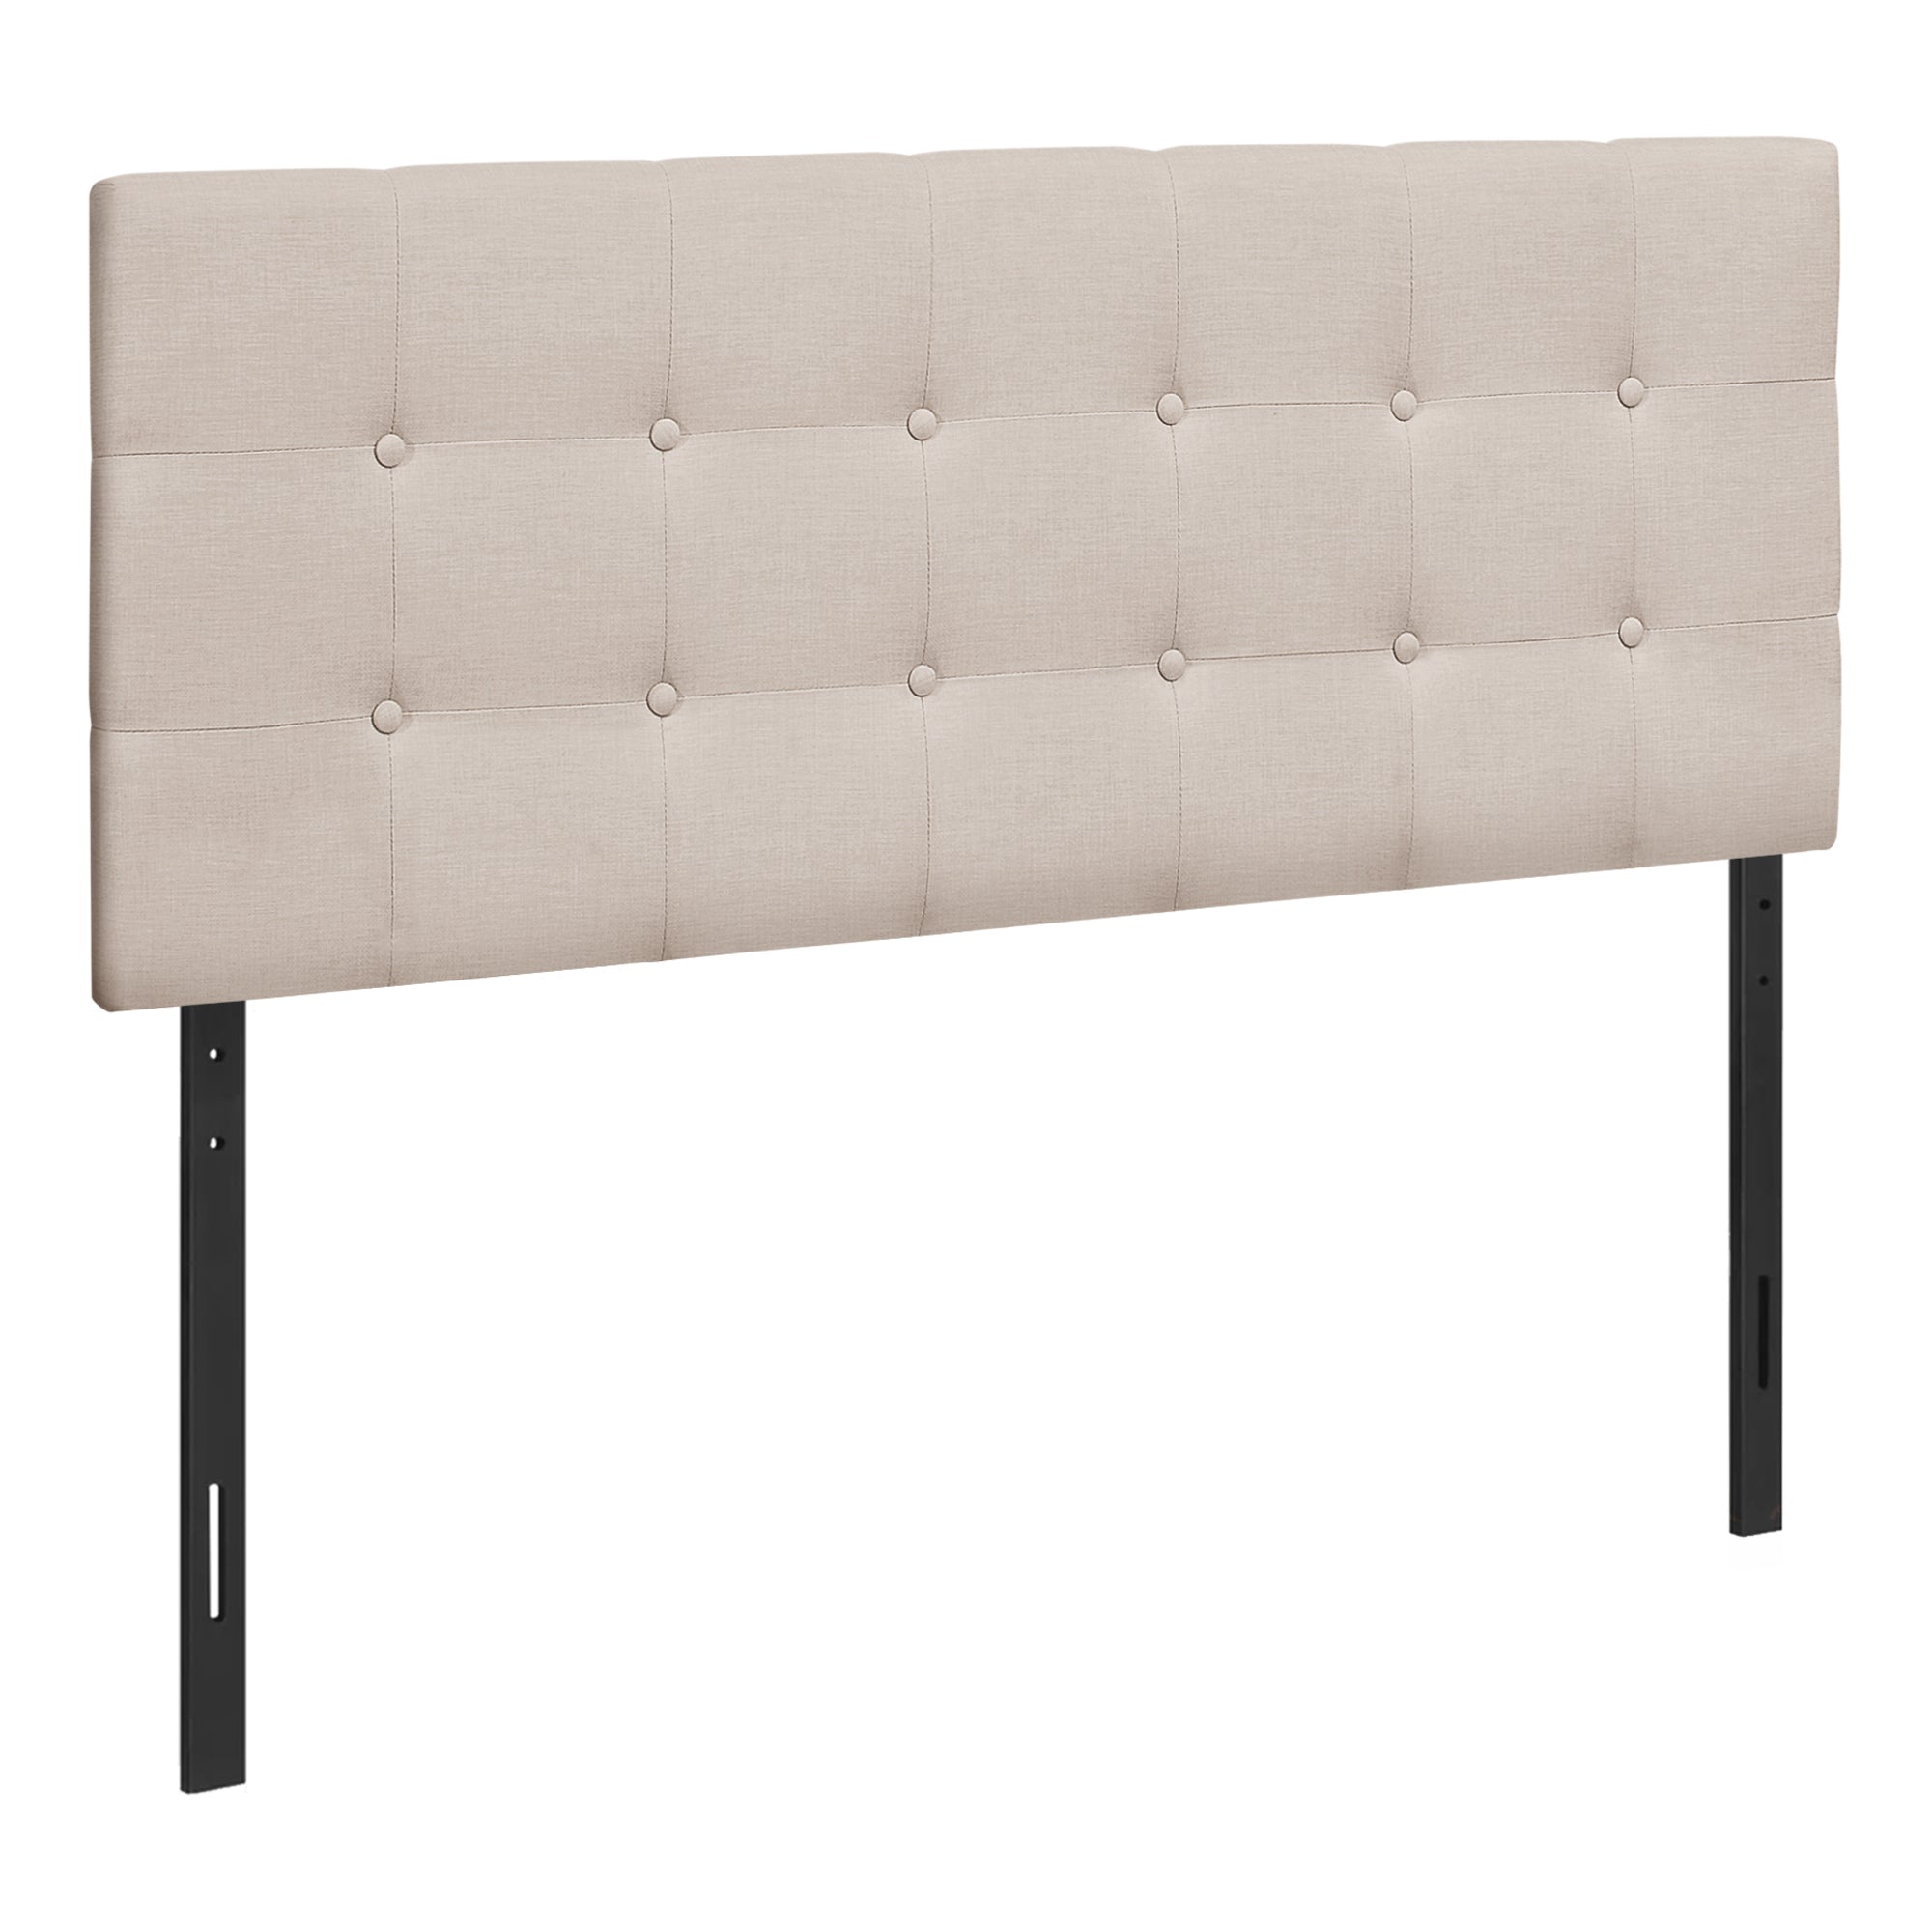 MN-446004F    Headboard, Bedroom, Full Size, Upholstered, Leather Look, Wooden Frame, Beige, Black, Contemporary, Modern